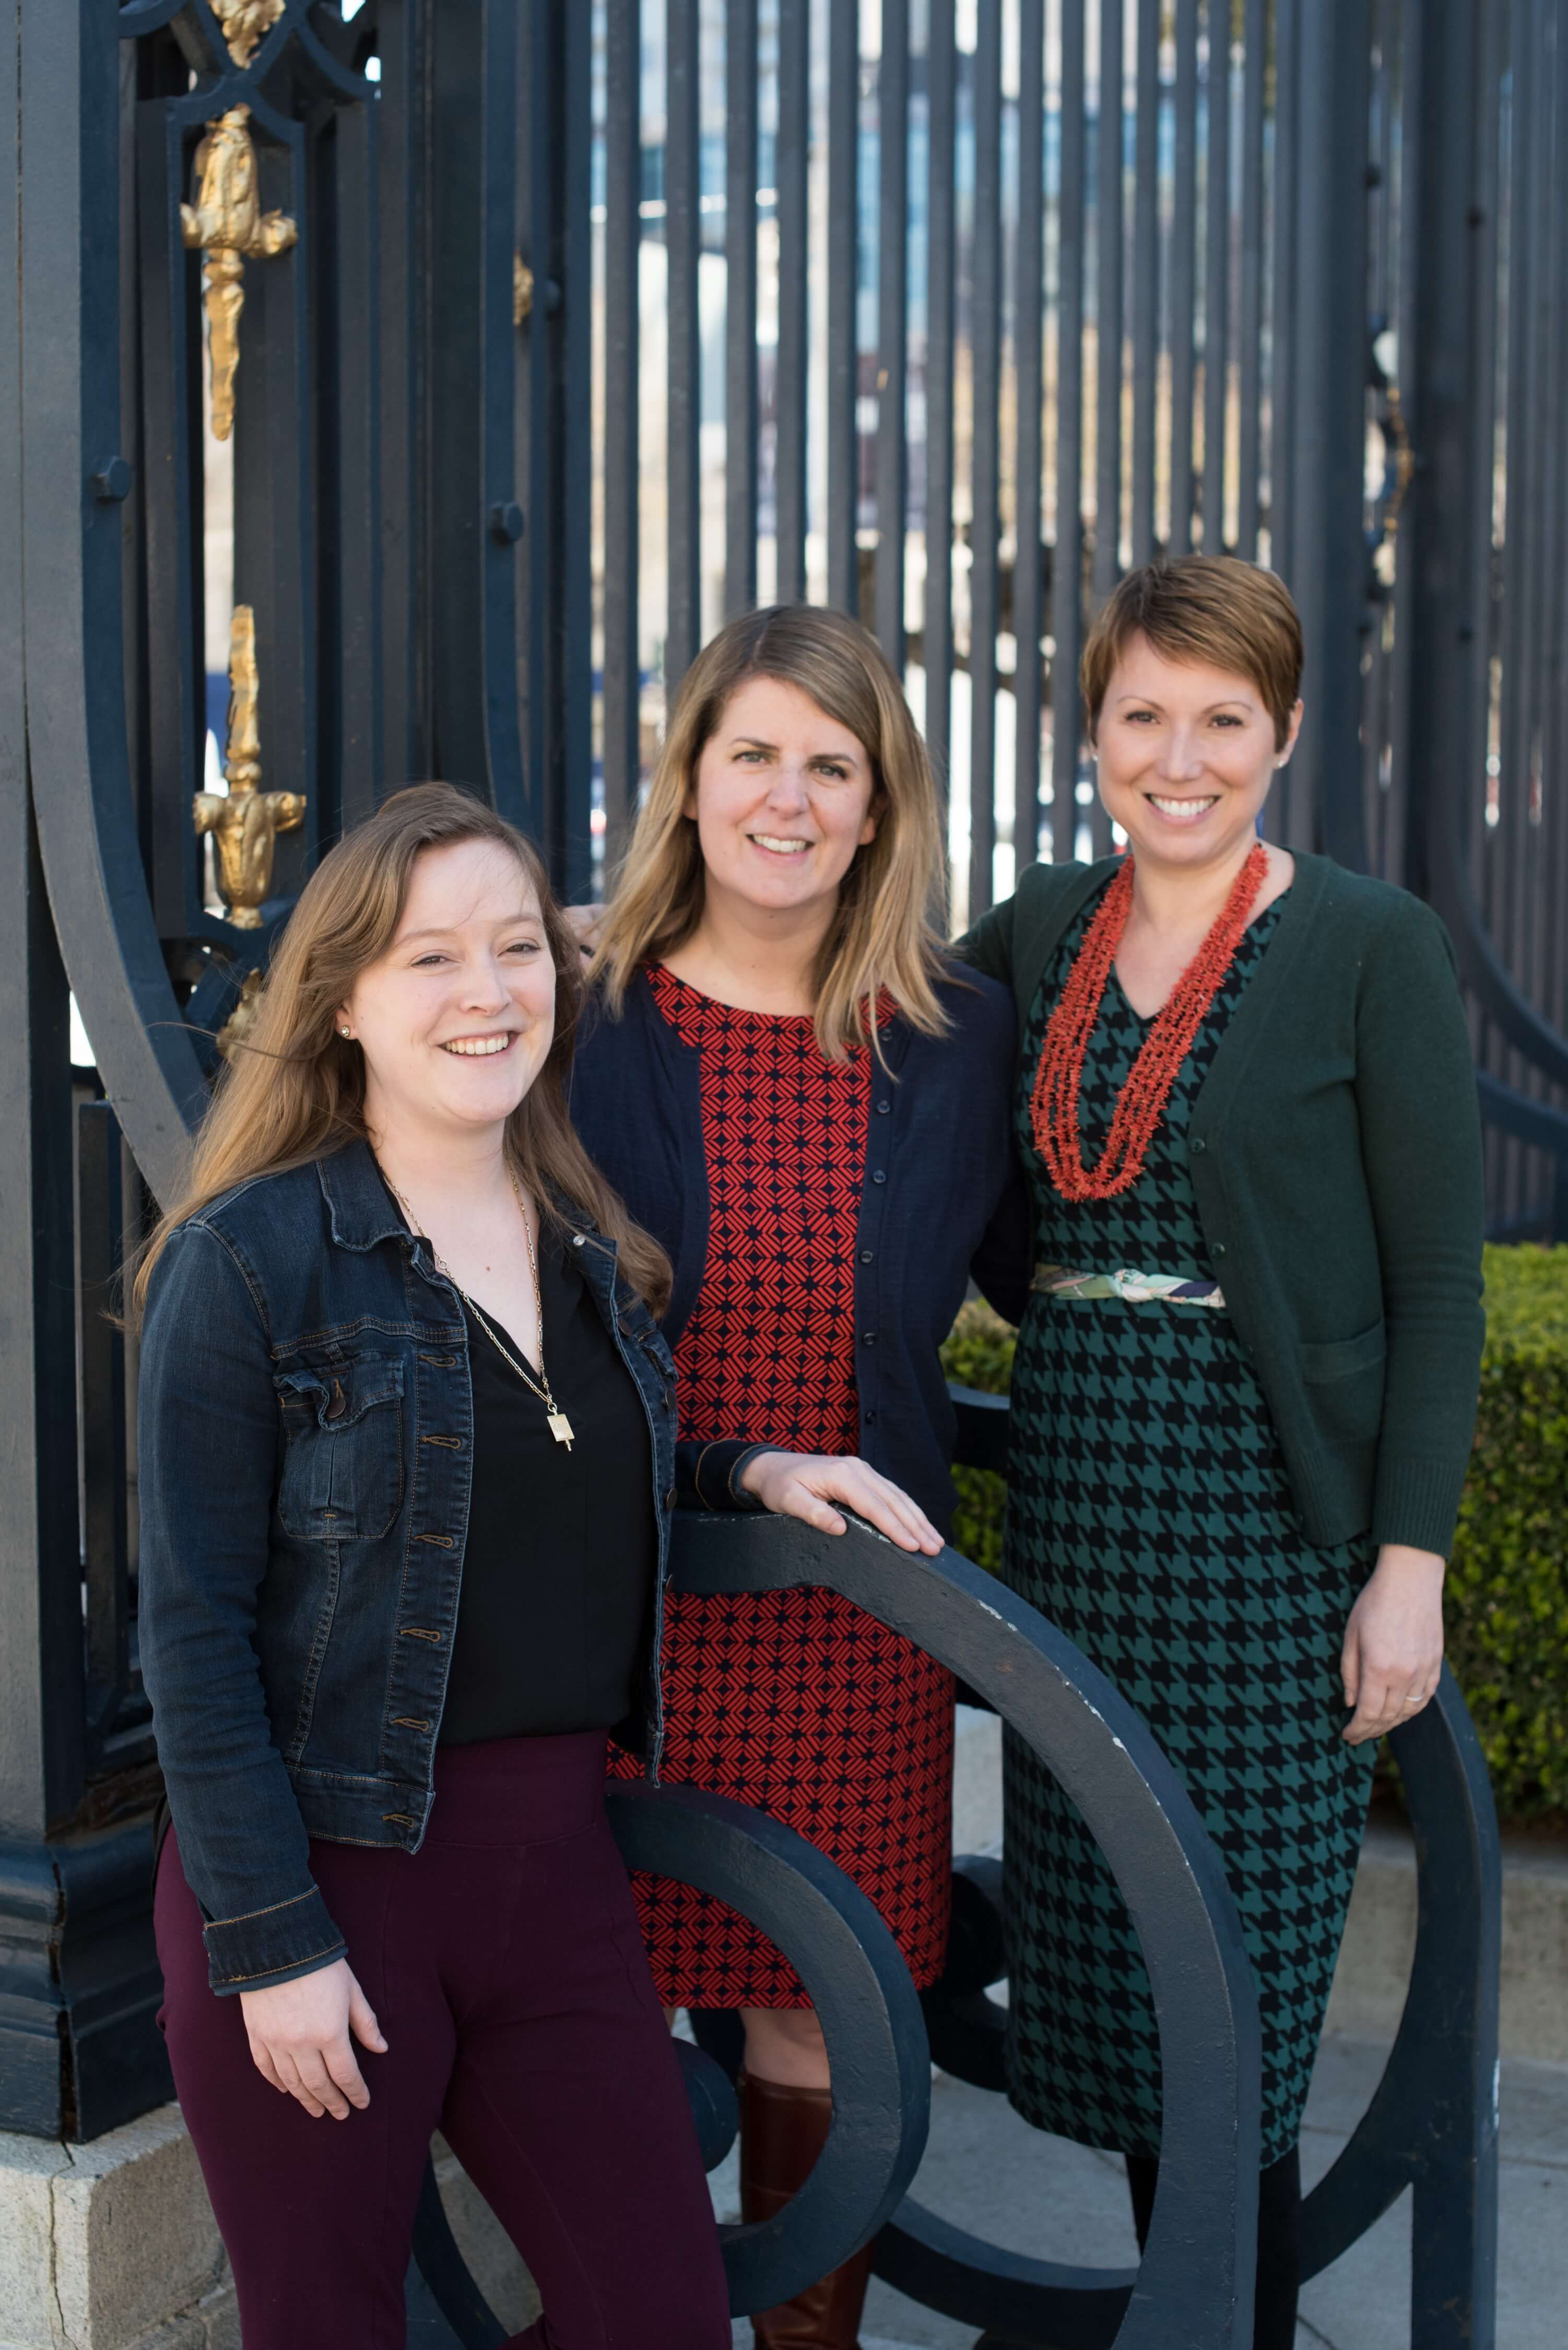 The Special Events team (l to r): Rebecca Scott, Katie Cagampan and Karman Pave. Photo Kristen Loken.